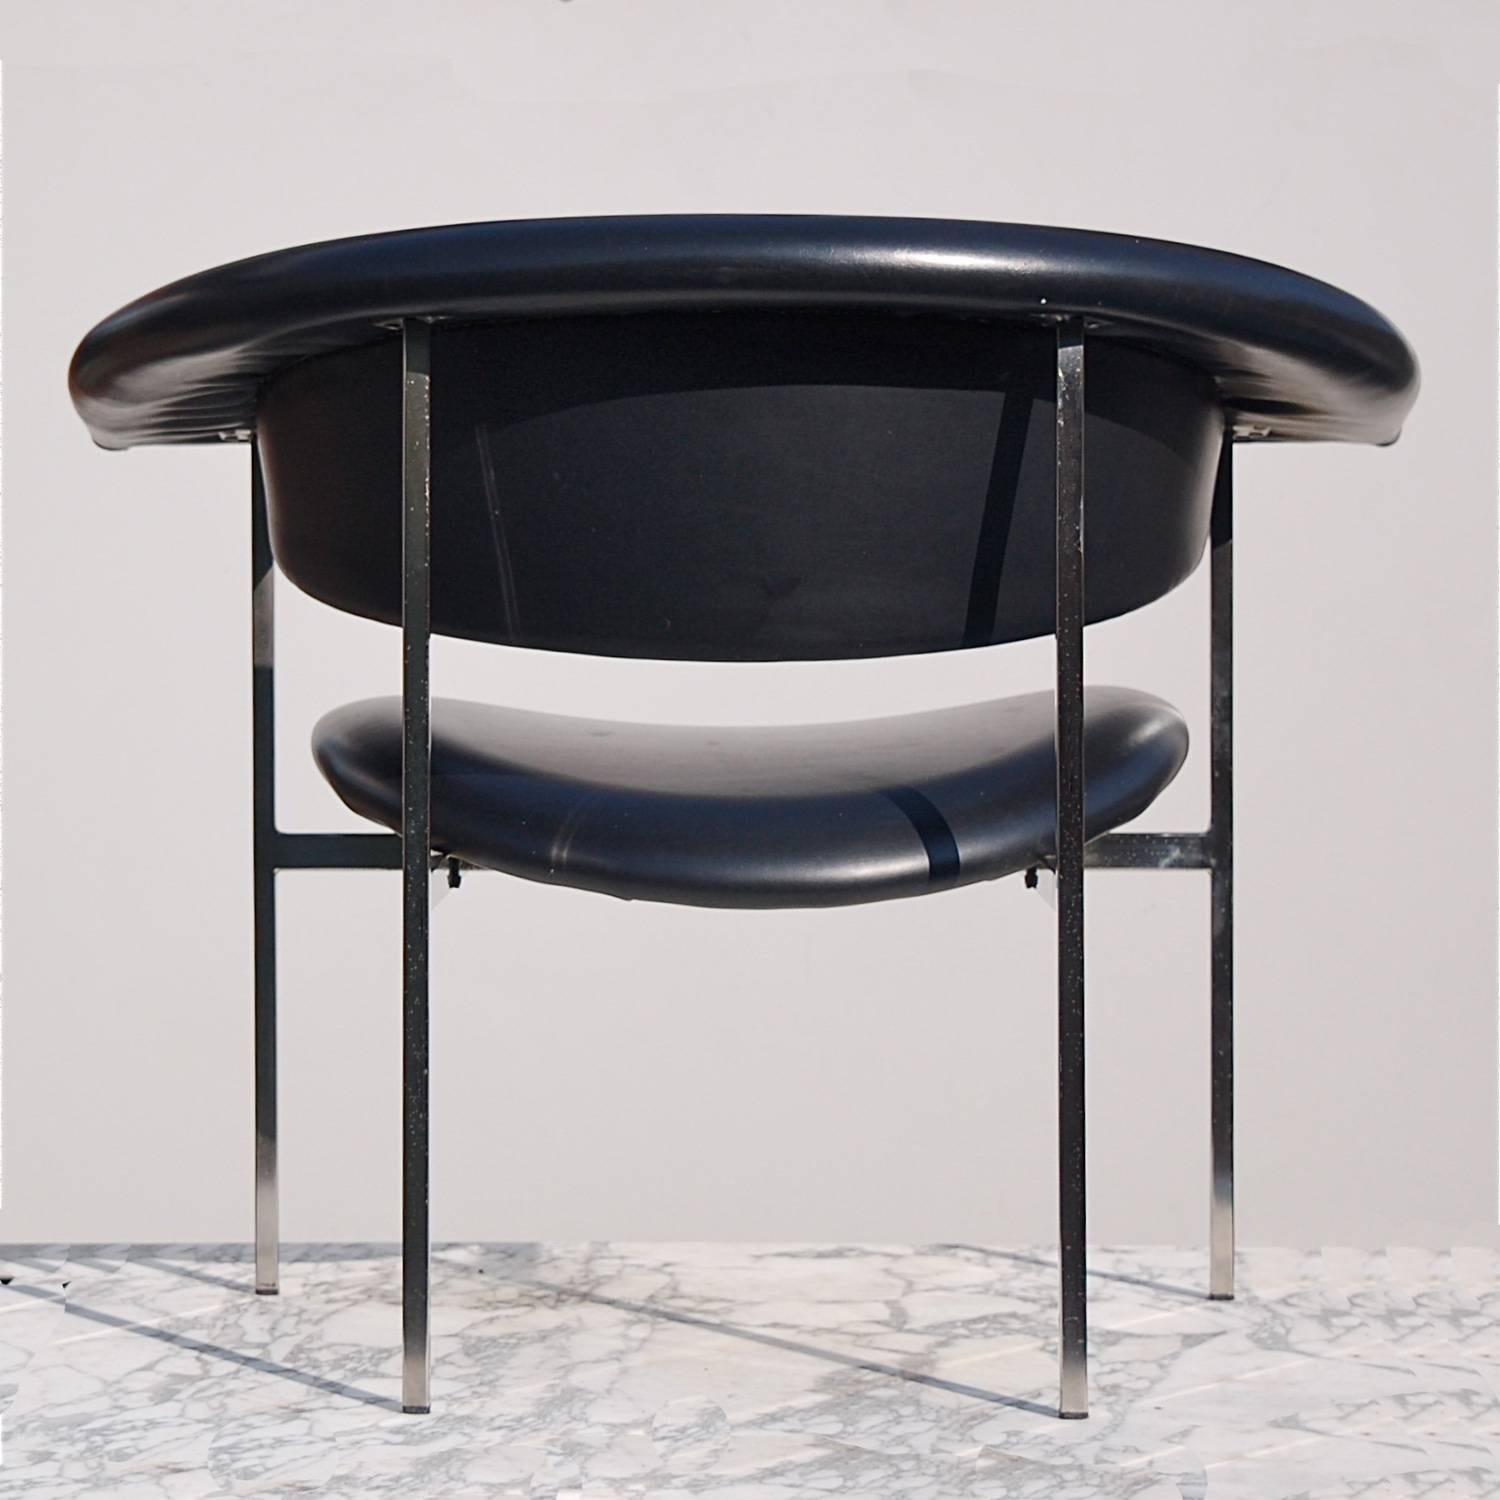 Comfortable, modernist, sci-fi, industrial armchair designed by Rudolf Wolf in 1962. Design name is Gamma. This chair has a faux leather, skai leather padded seat, demi circle, half circle, wrap around back and arm rest on a nickel-plated square